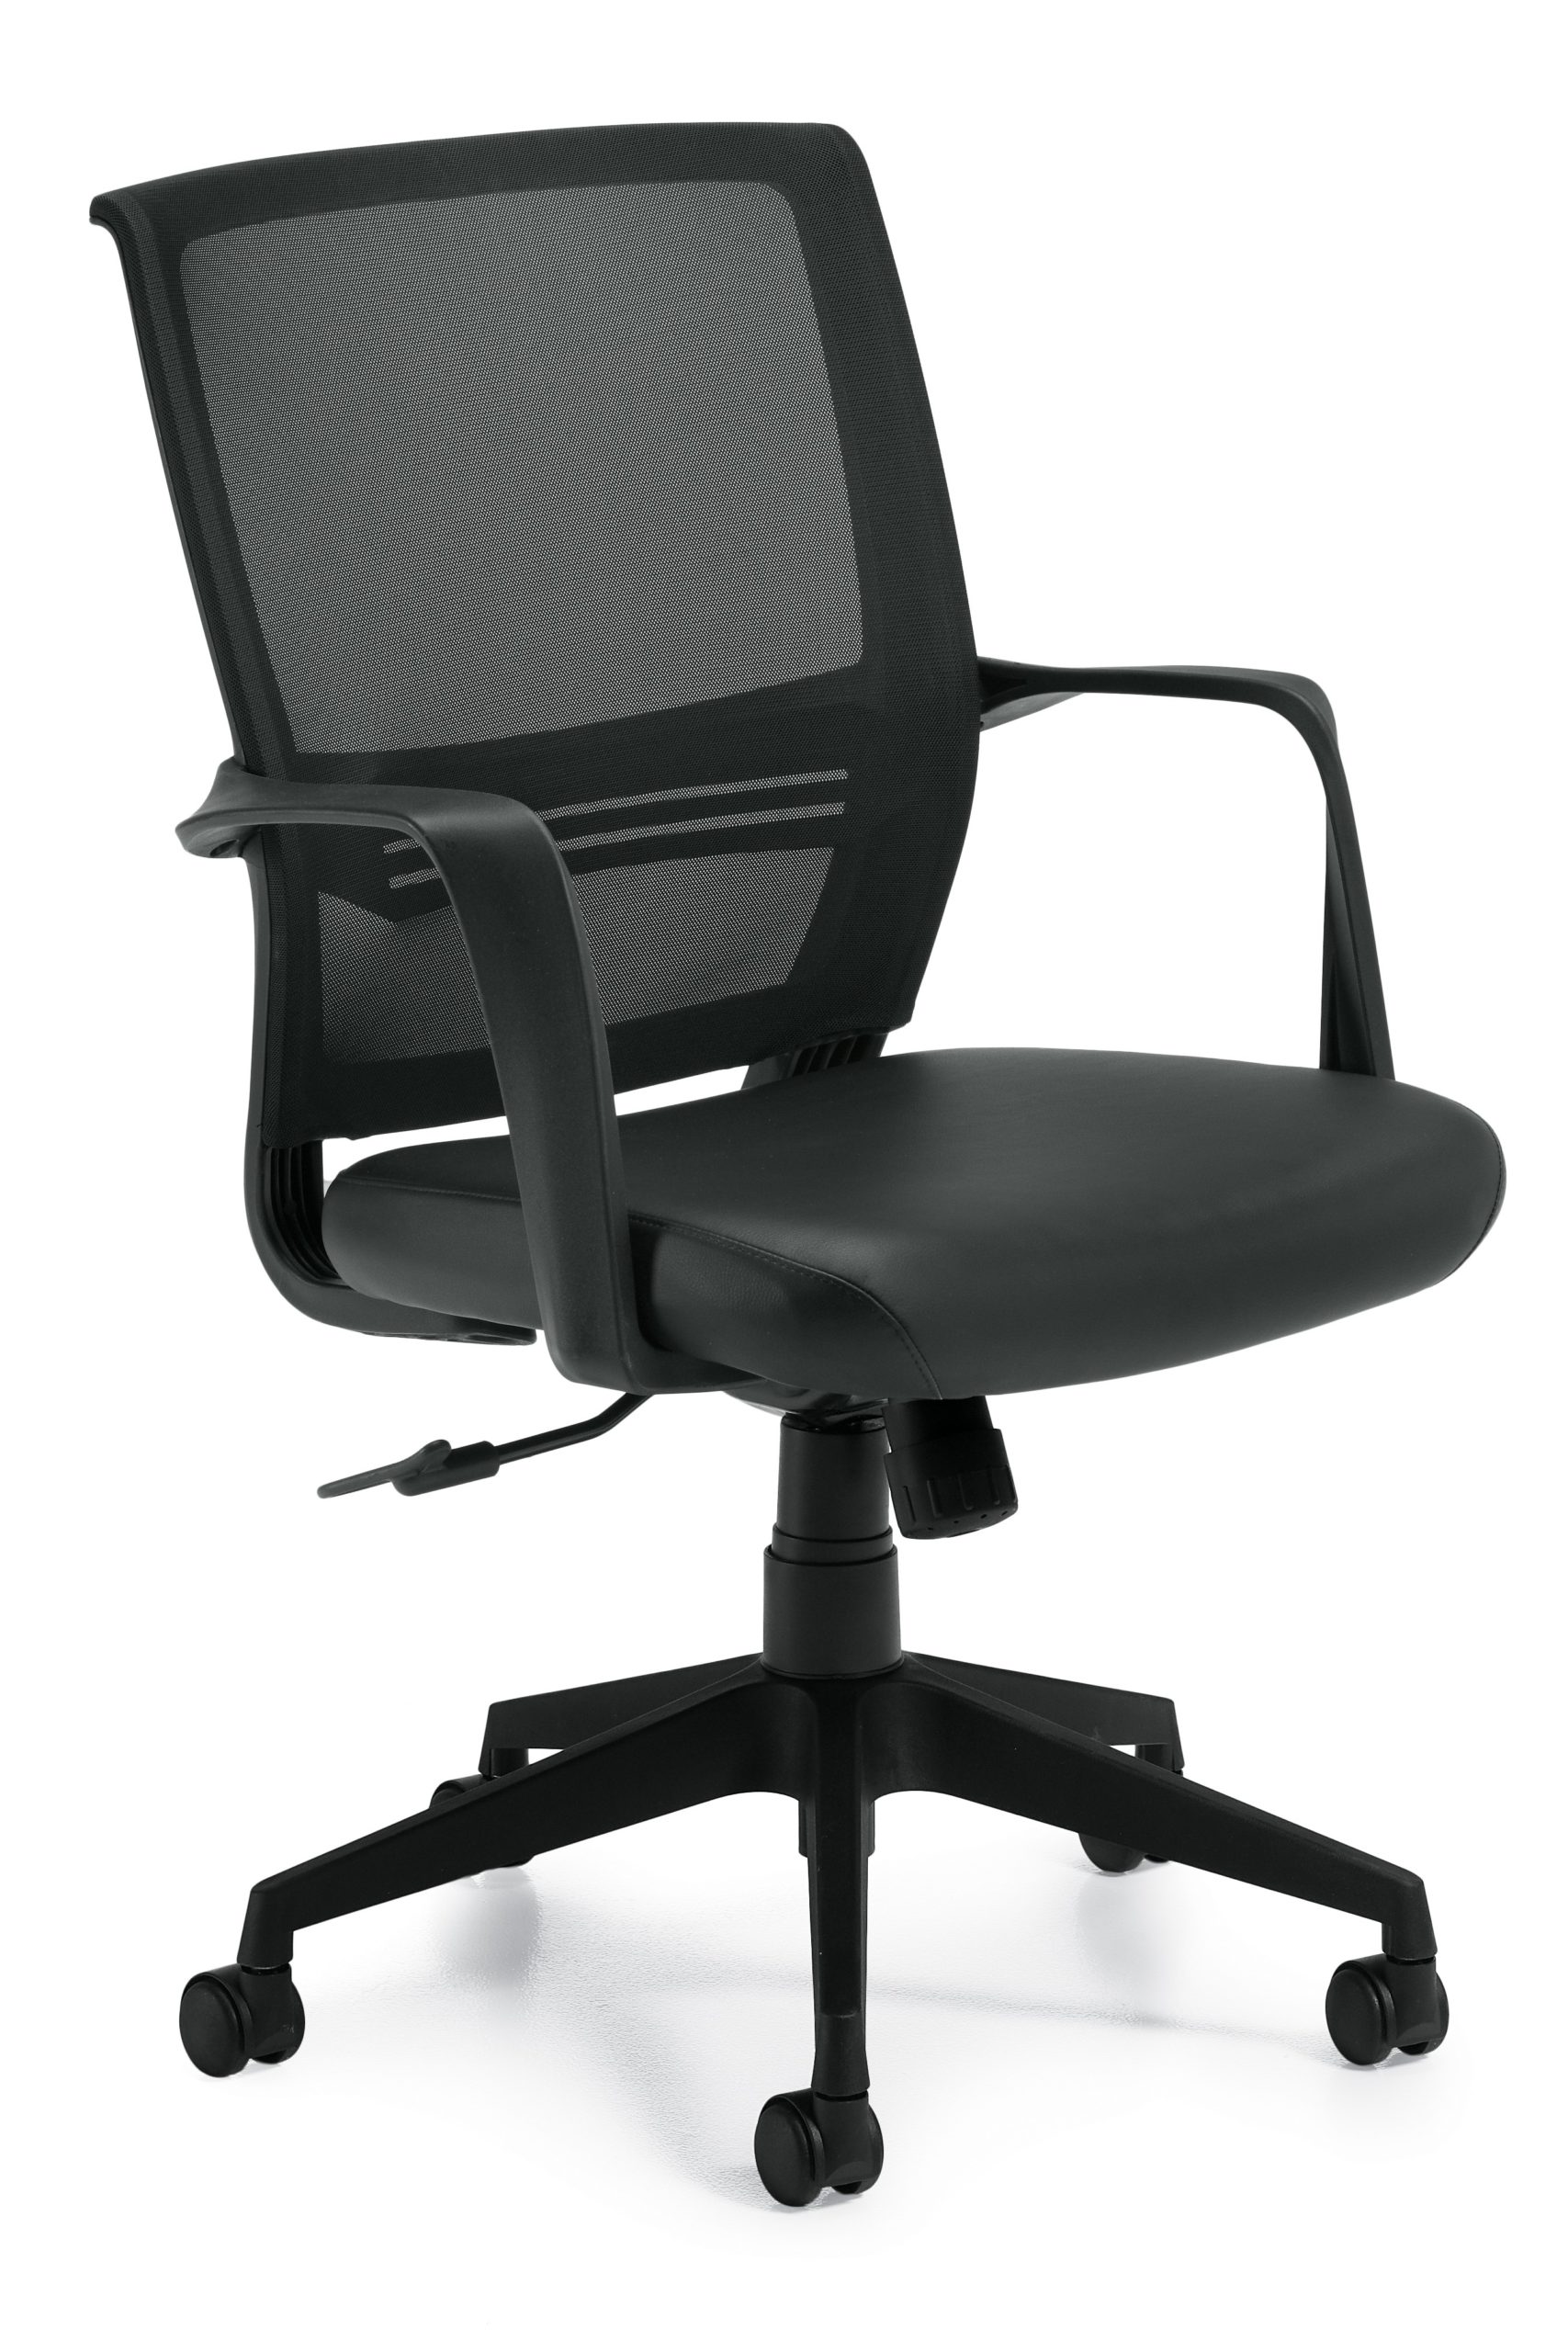 Swivel-tilt conference chair with medium-sized mesh back, twisted loop arms, black Luxhide seat, tilt lock and black 5-star base.